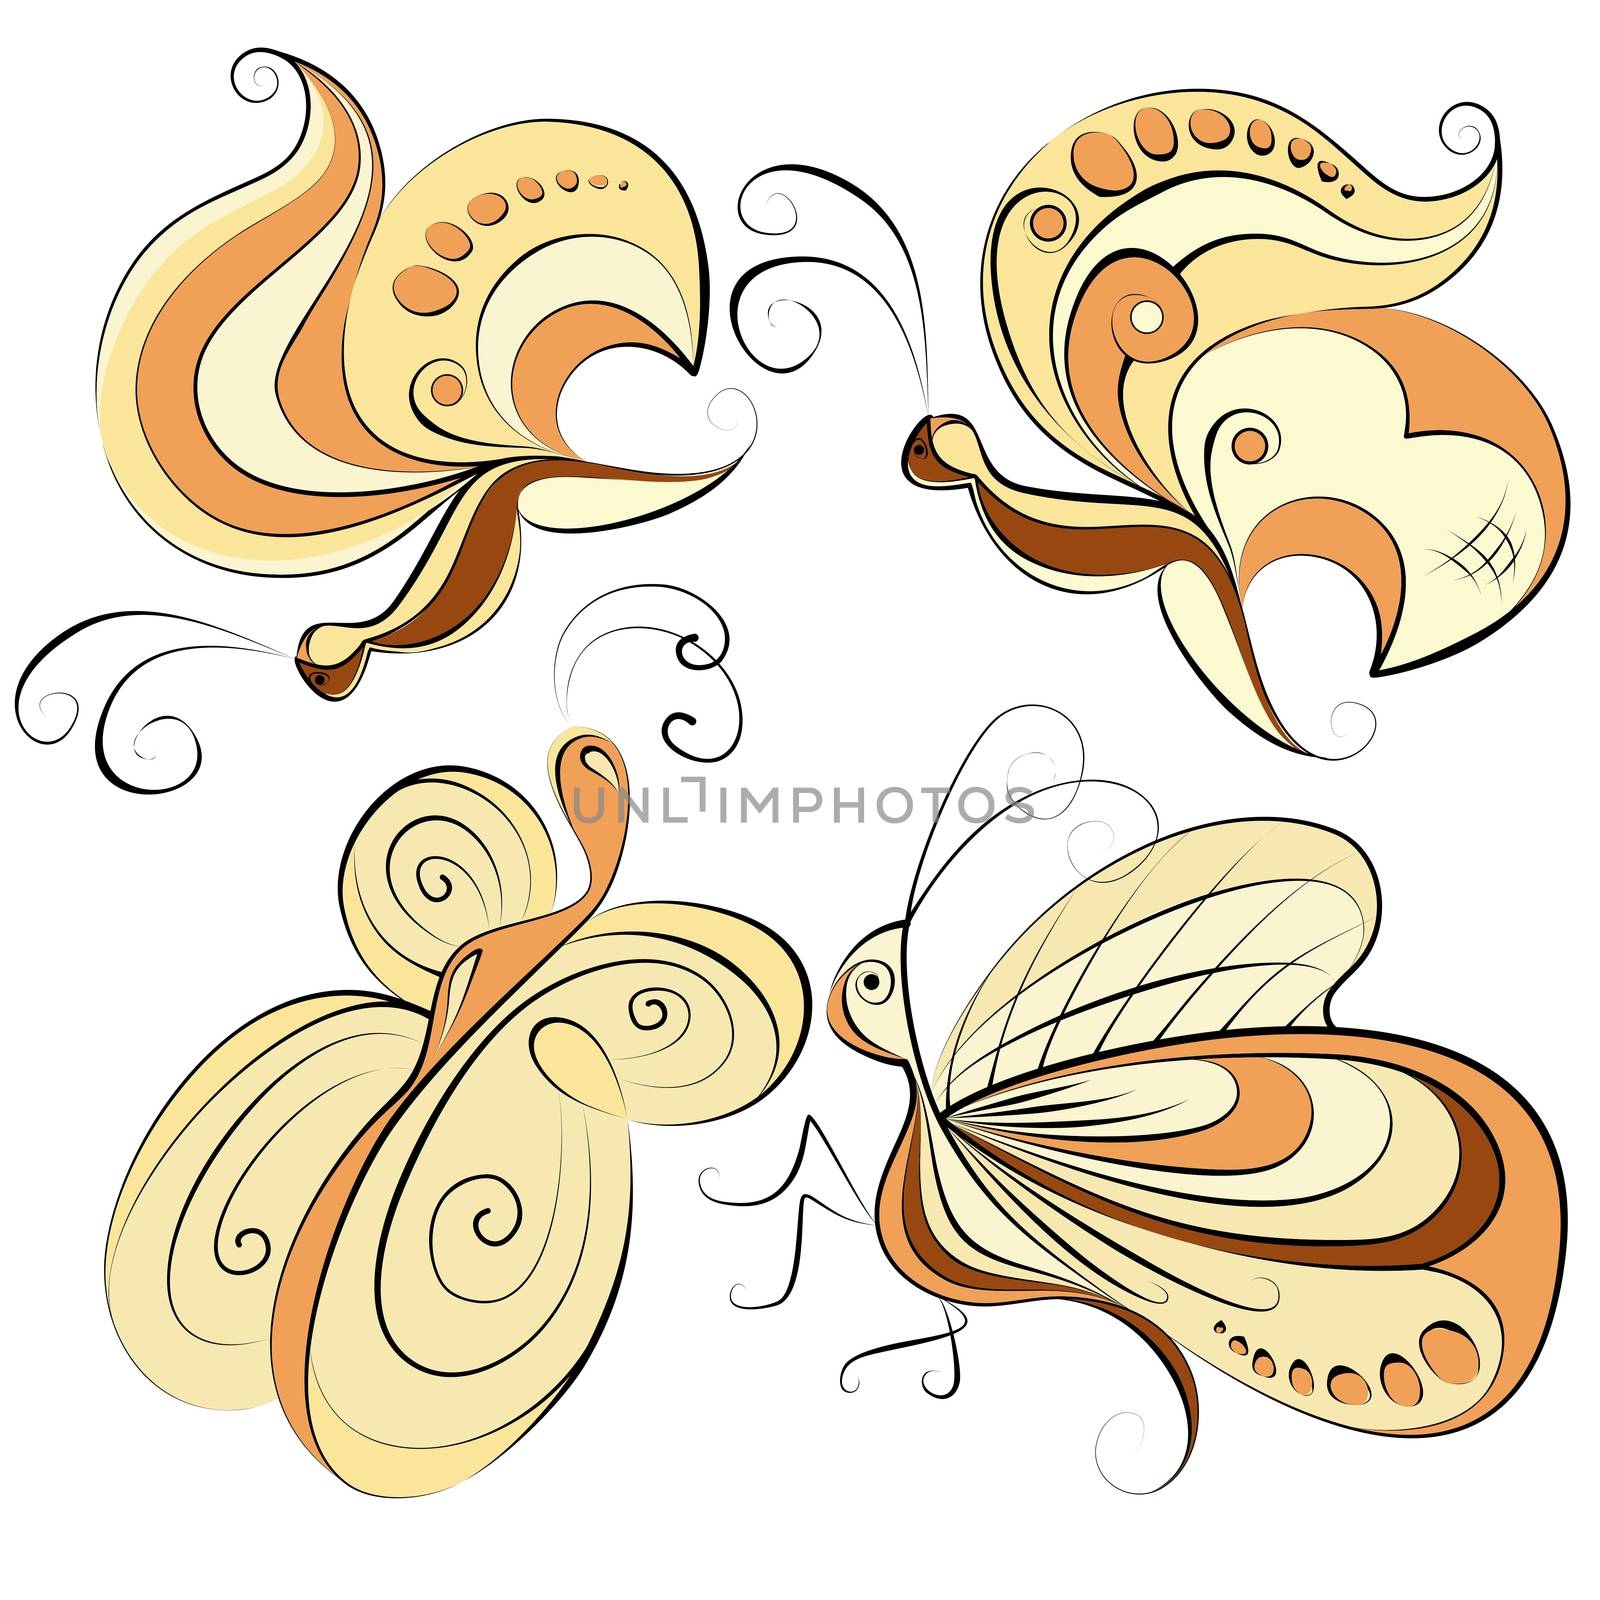 Illustration - four different butterflies on a white background